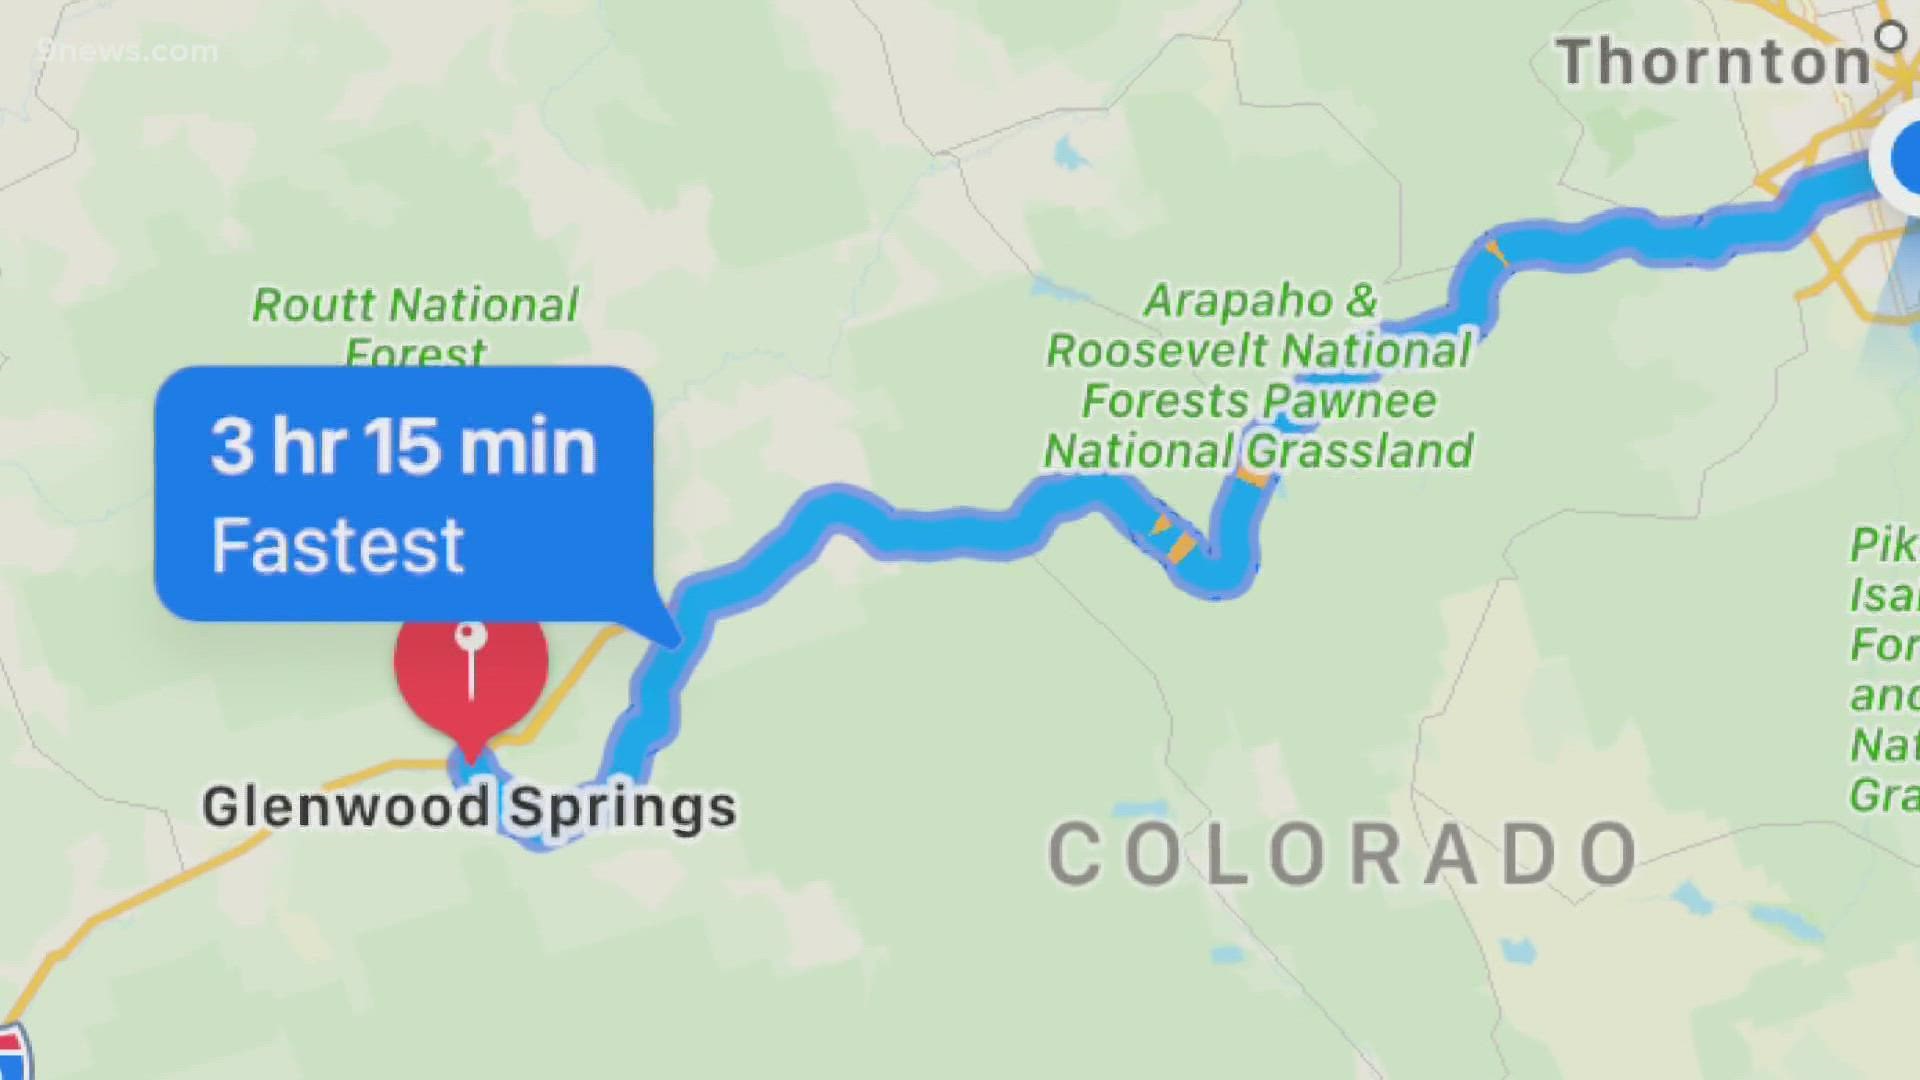 On Monday, Google Maps didn't show detour CDOT suggests to get to and from Glenwood Springs.